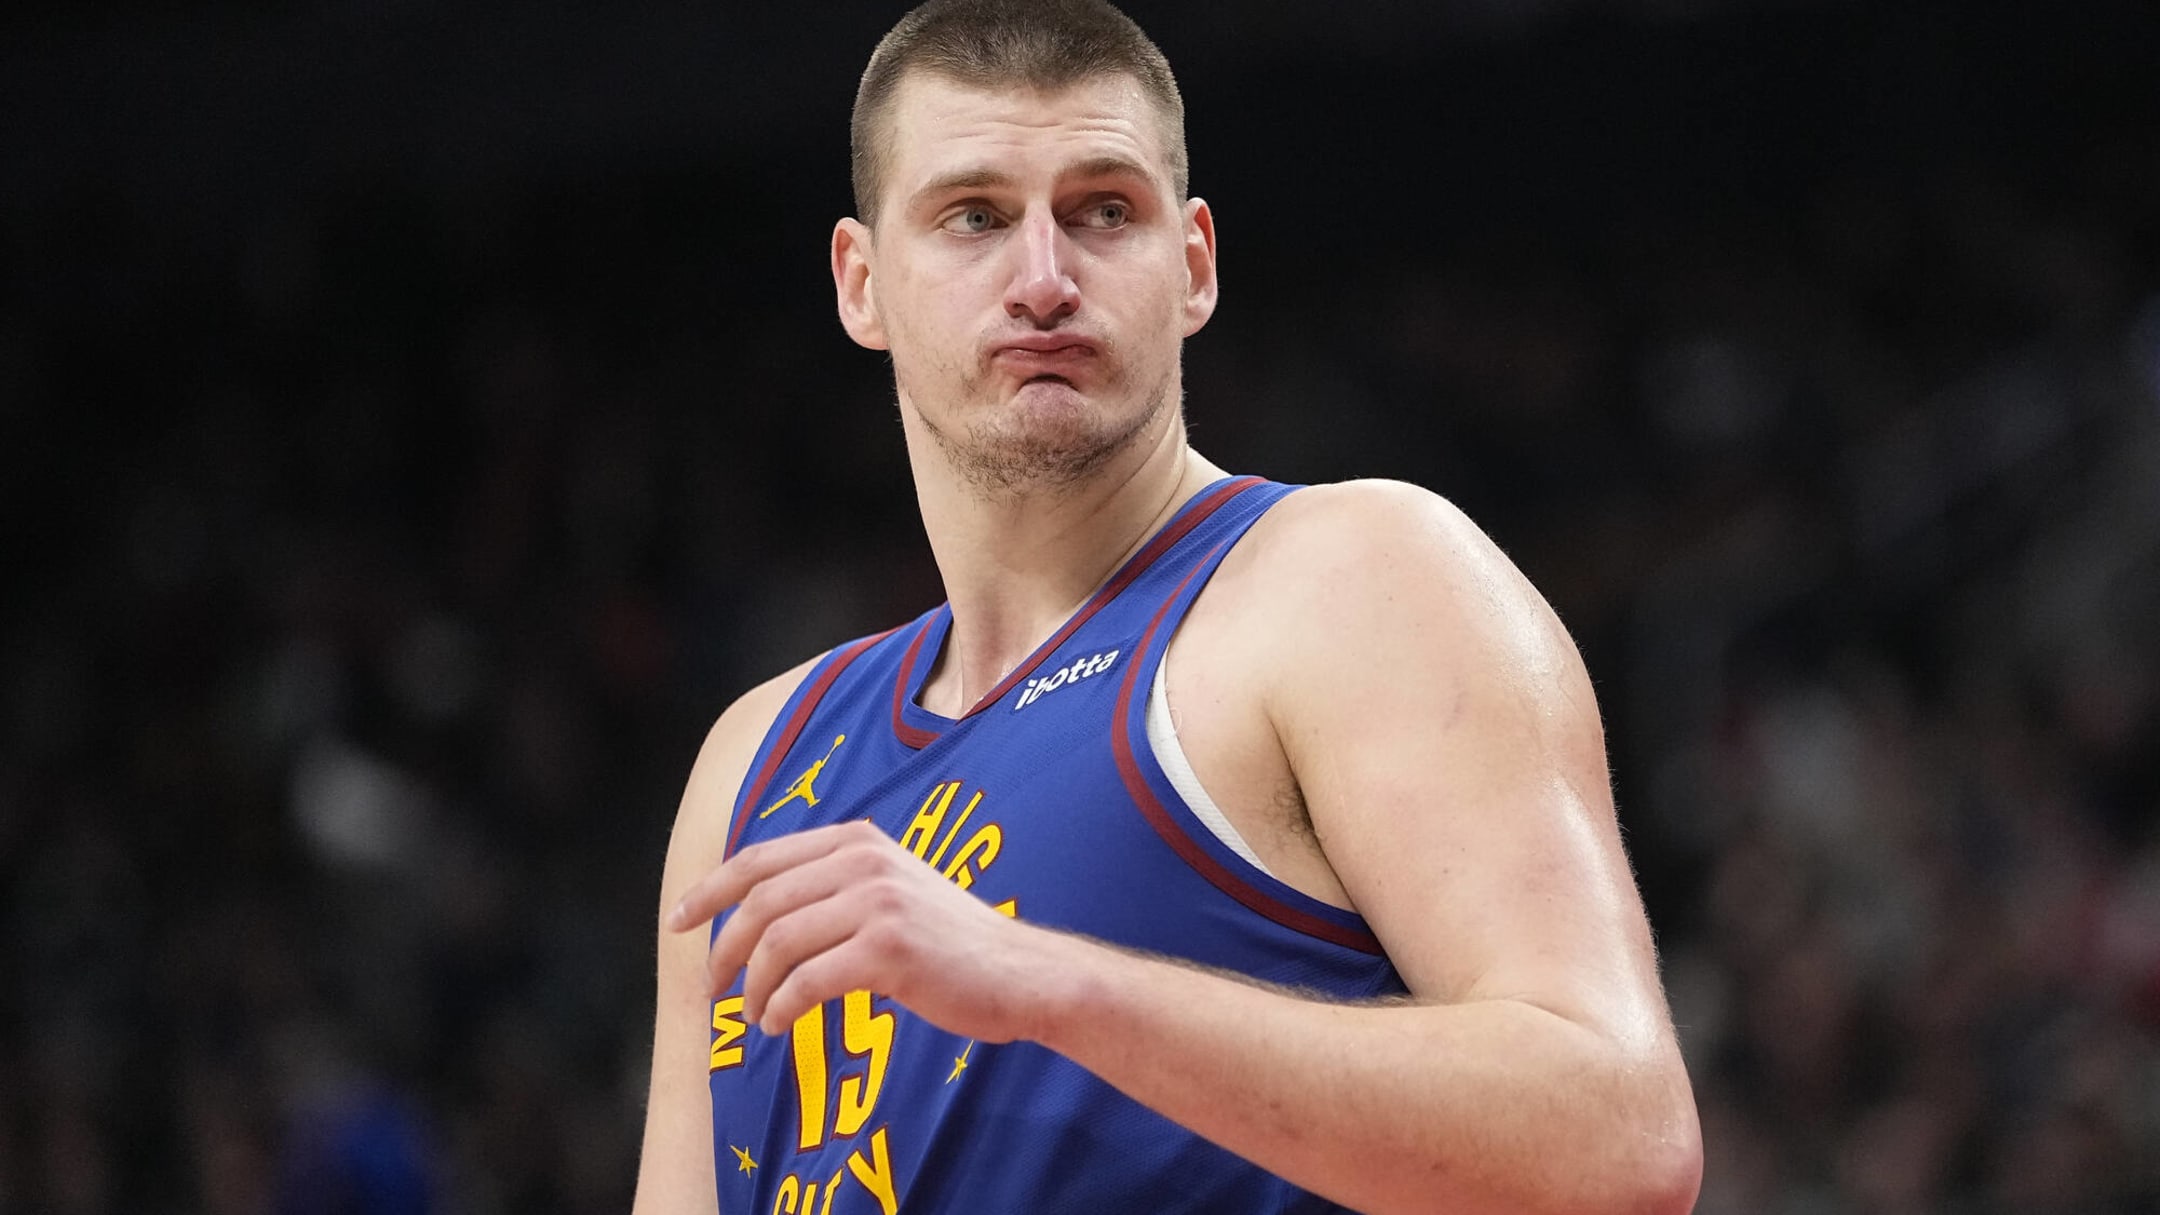 Nikola Jokic Leaves Nike and Gets New Signature Shoes With 361 Degrees